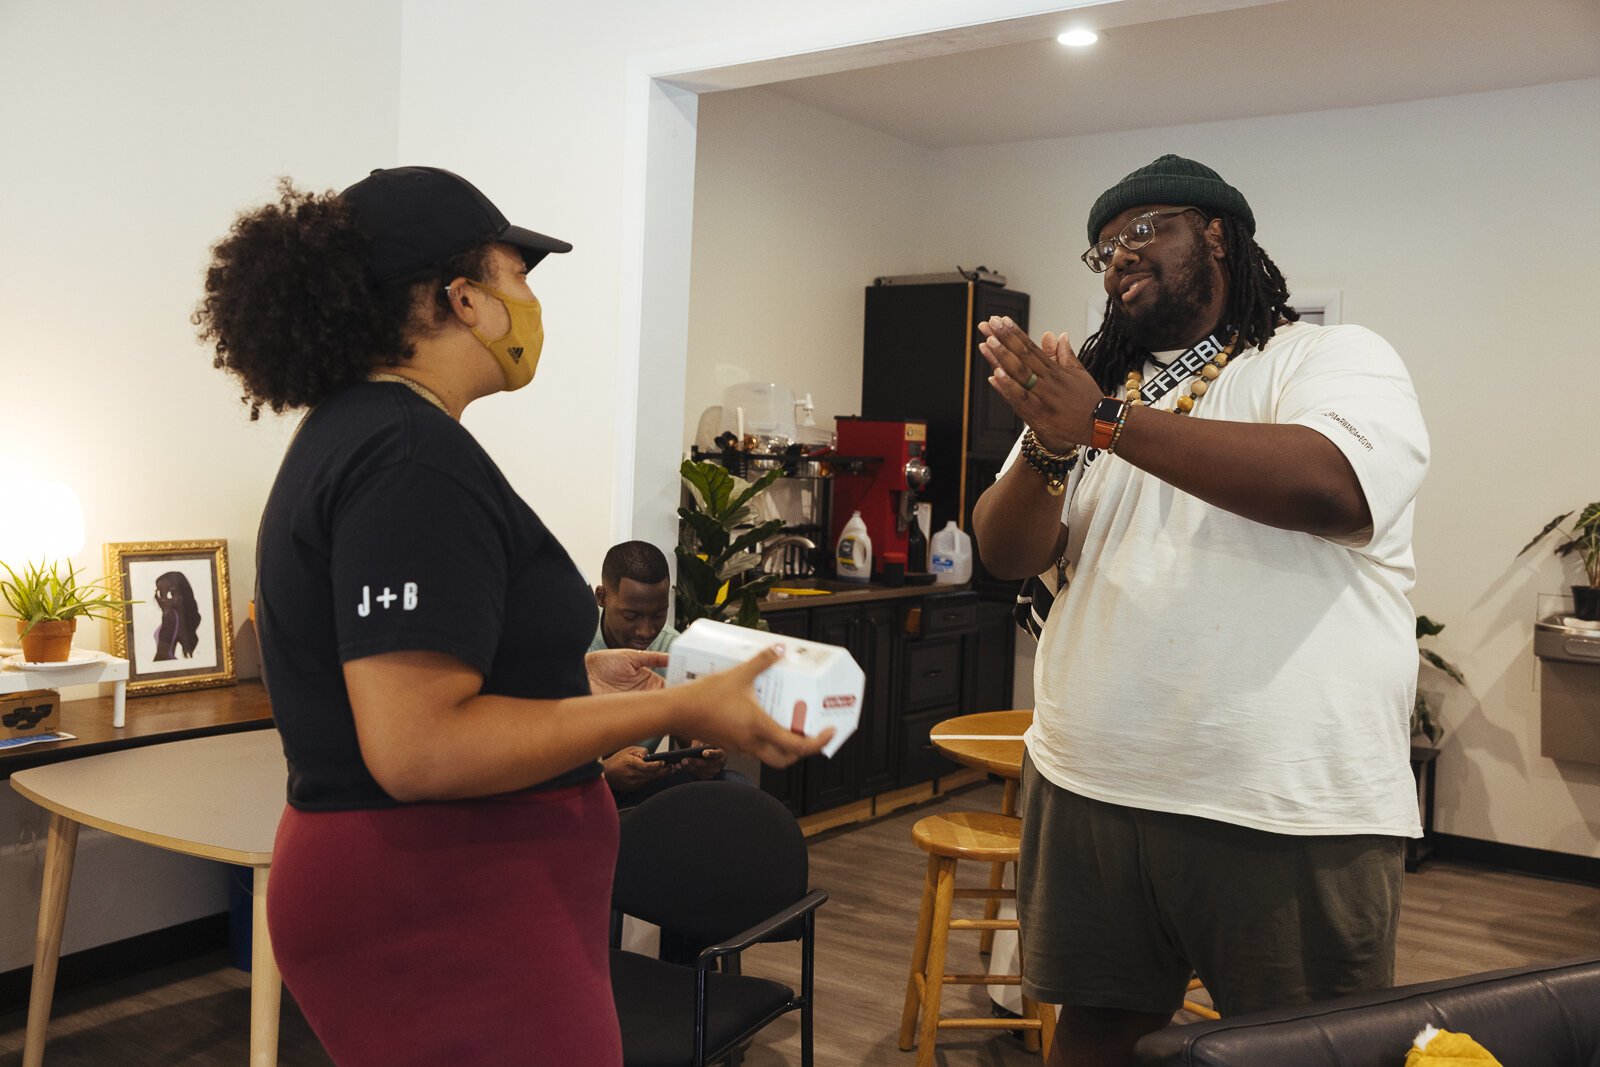 Co-founder Bartholomew Jones talks with a customer at Cxffeeblack's Anti-Gentrification Coffee Club #1, located at 751 National Street in The Heights. (Ziggy Mack) 